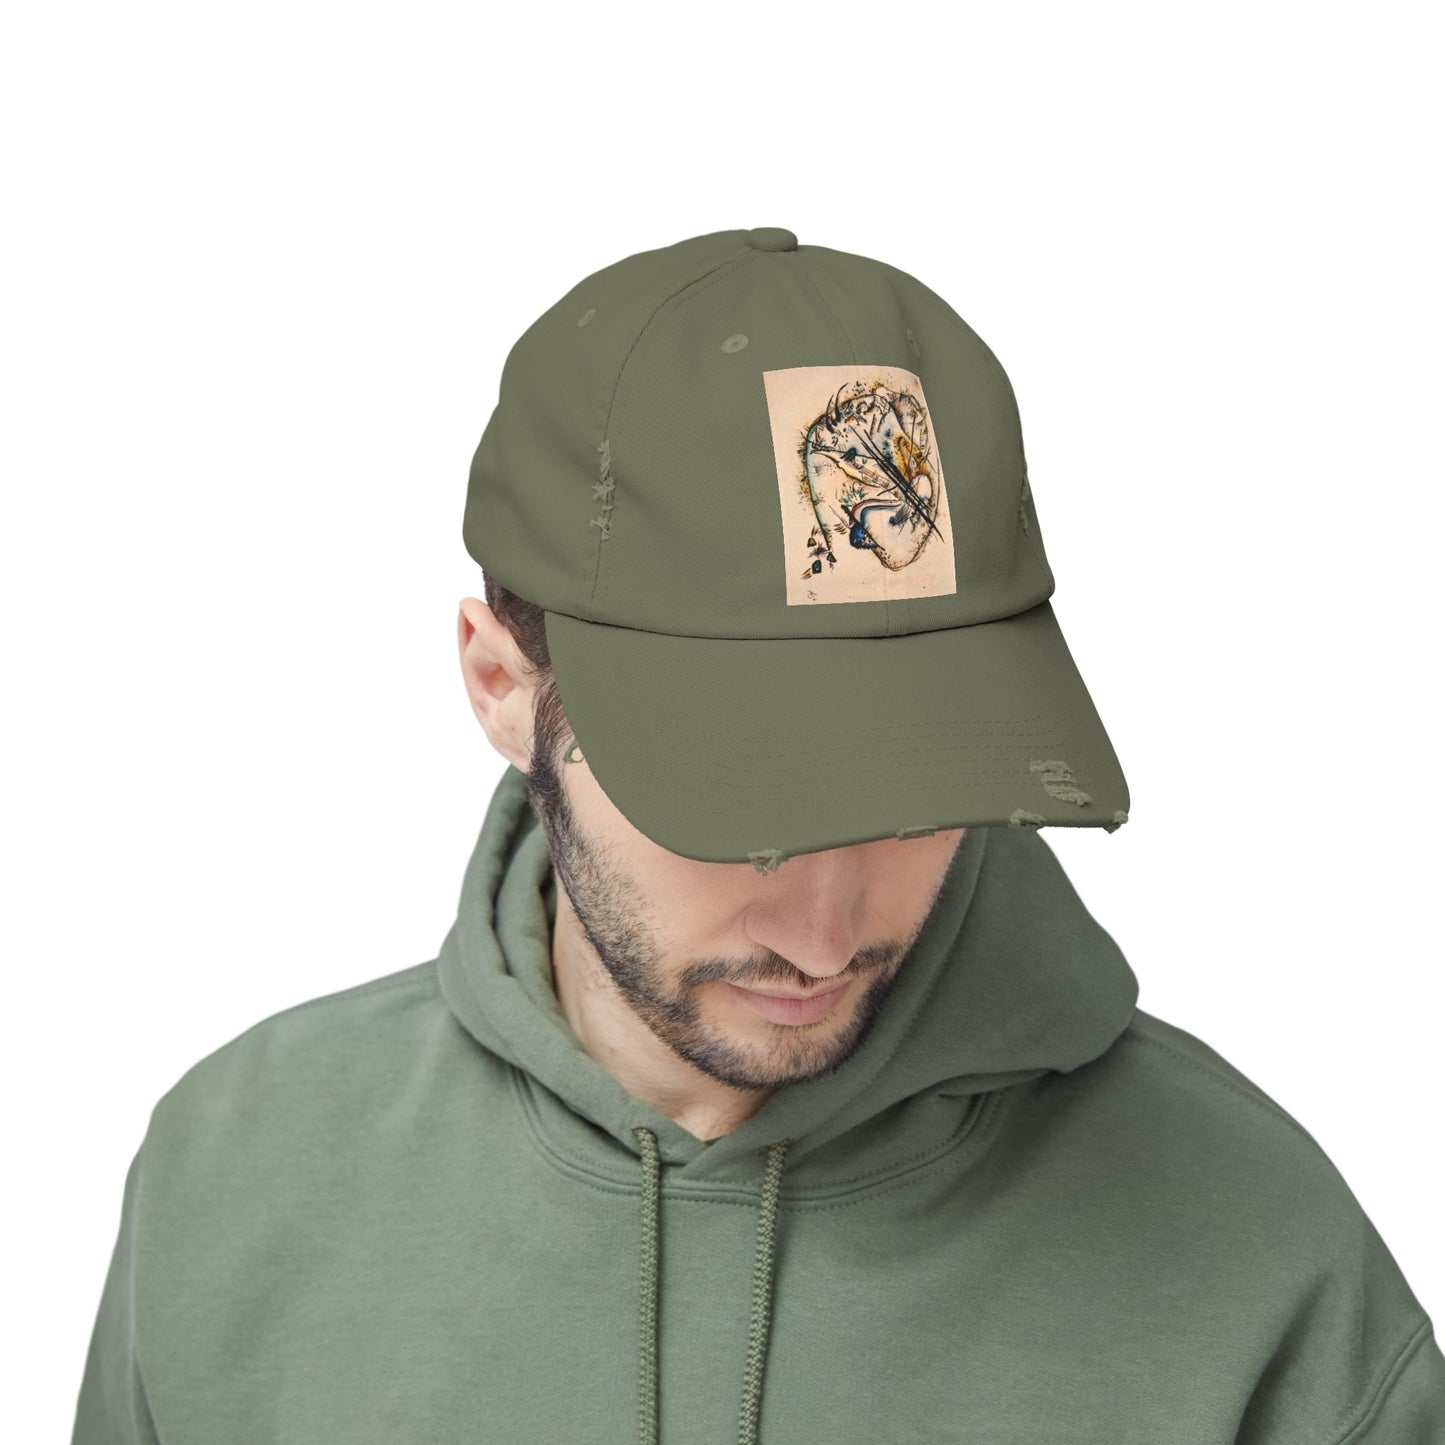 a man wearing a green hat with a picture of a tiger on it